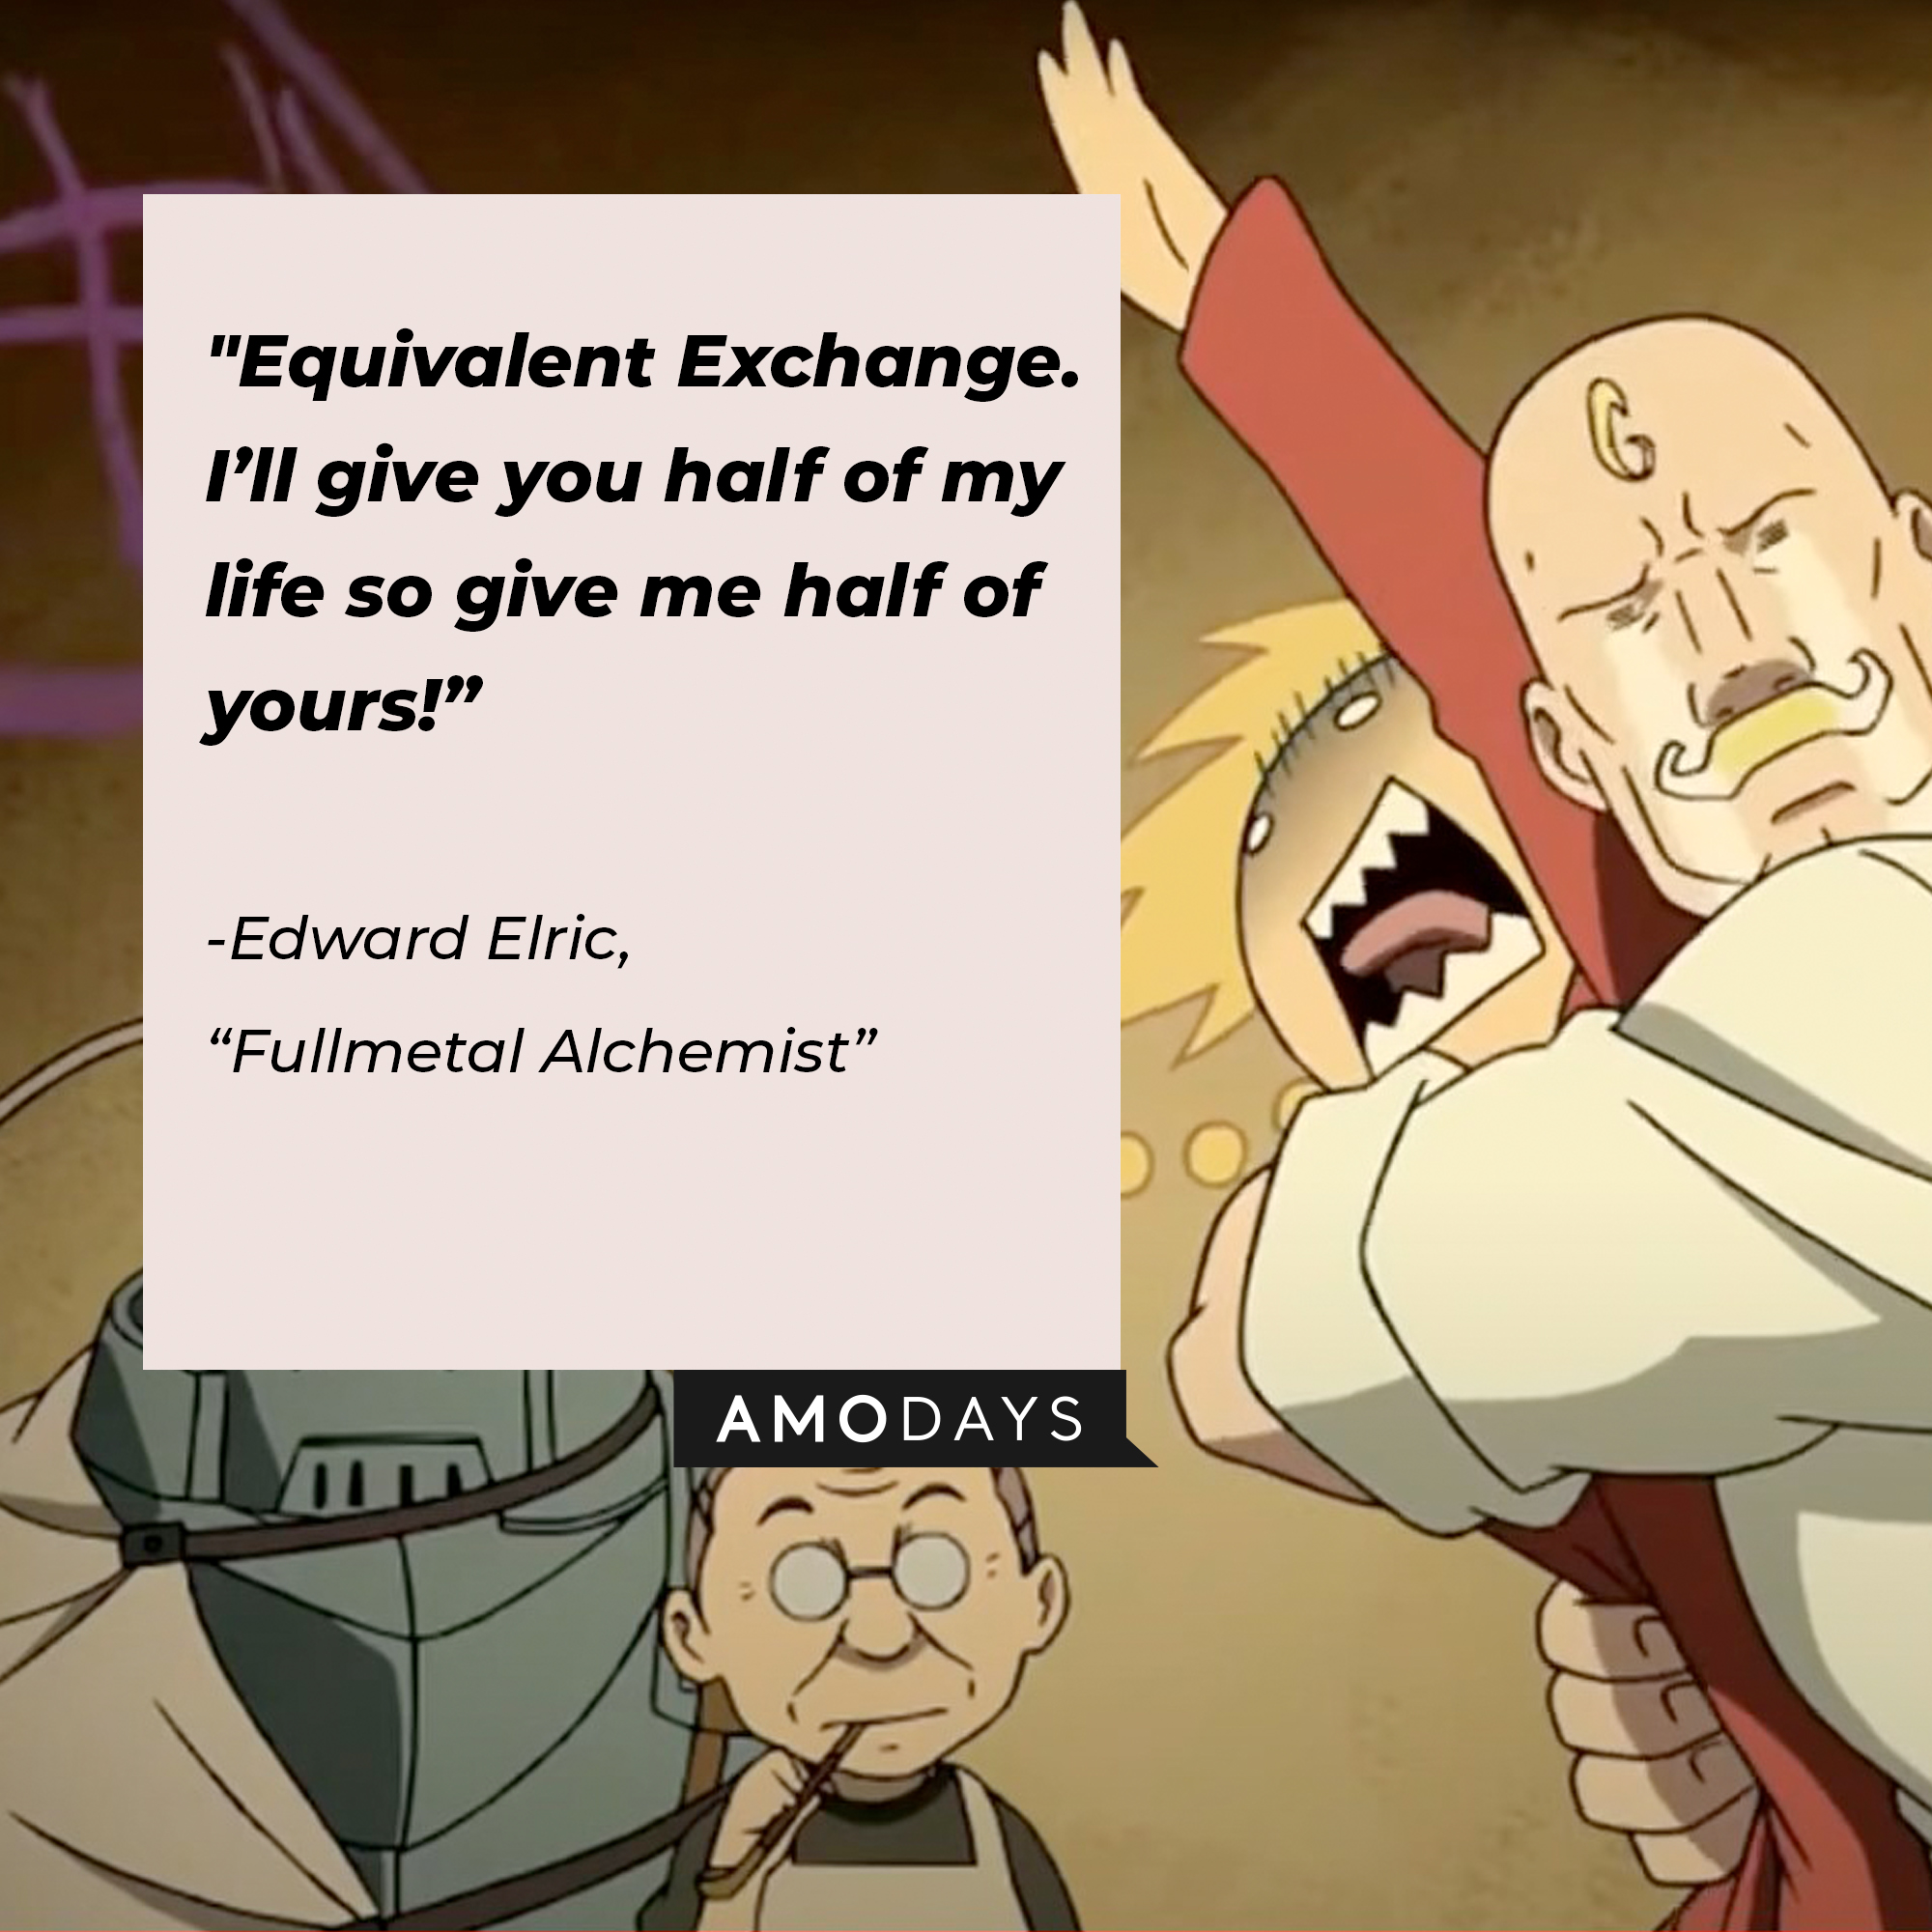 Edward Elric's quote: "Equivalent Exchange. I’ll give you half of my life so give me half of yours!” | Image: facebook.com/FMAHiromuArakawa